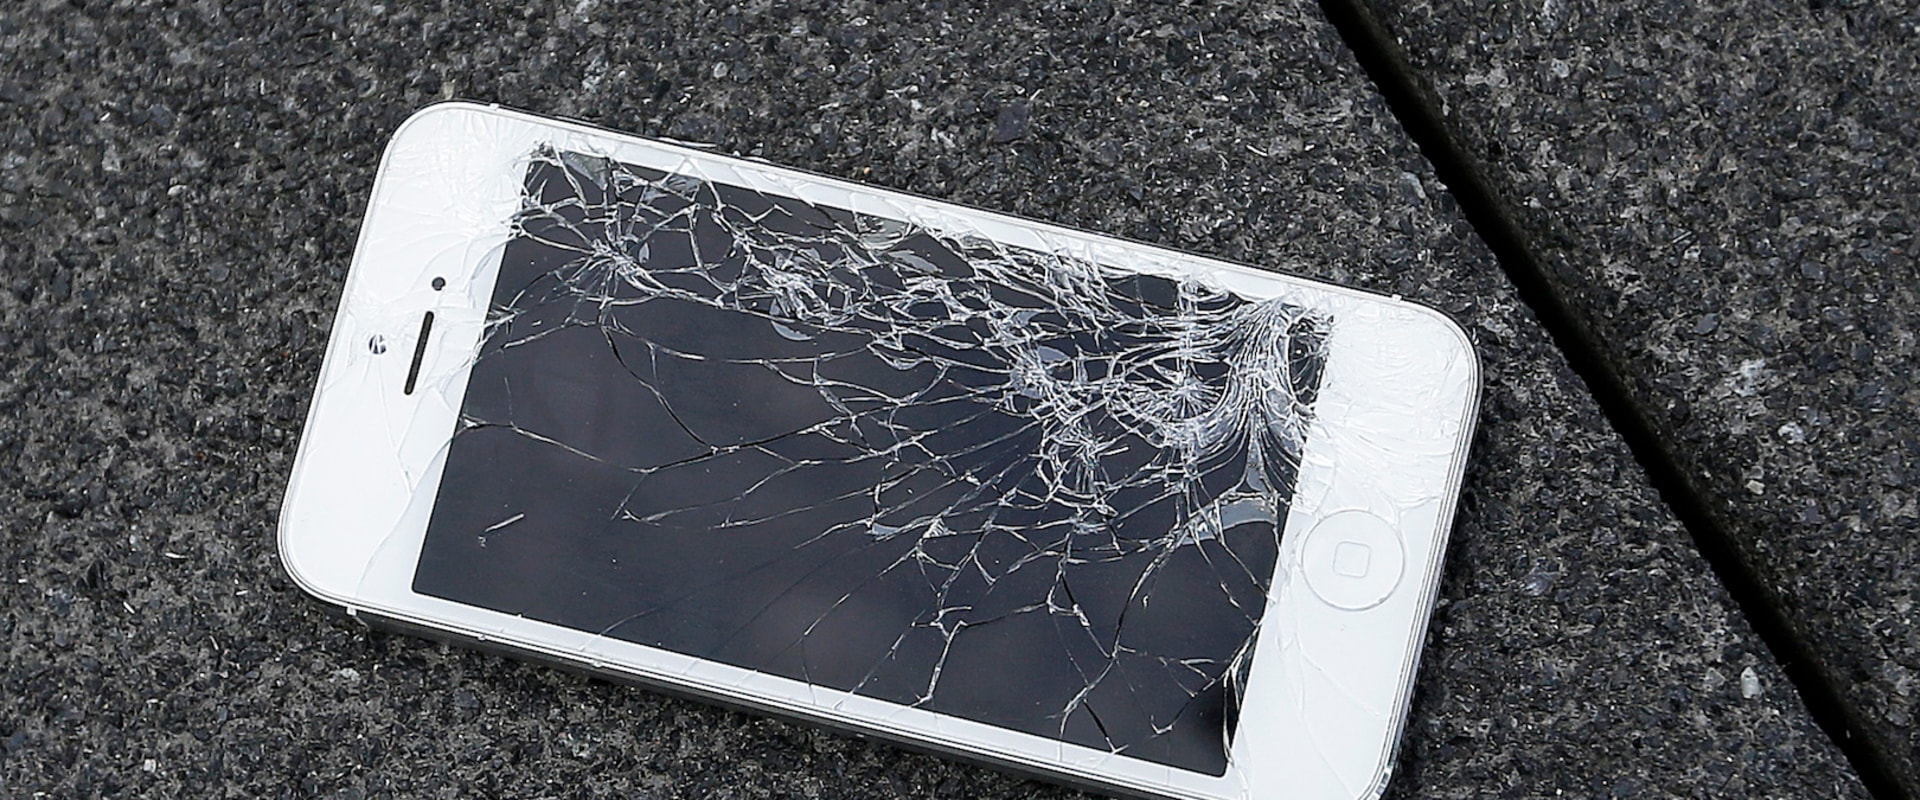 How much does it cost to fix an iphone screen?